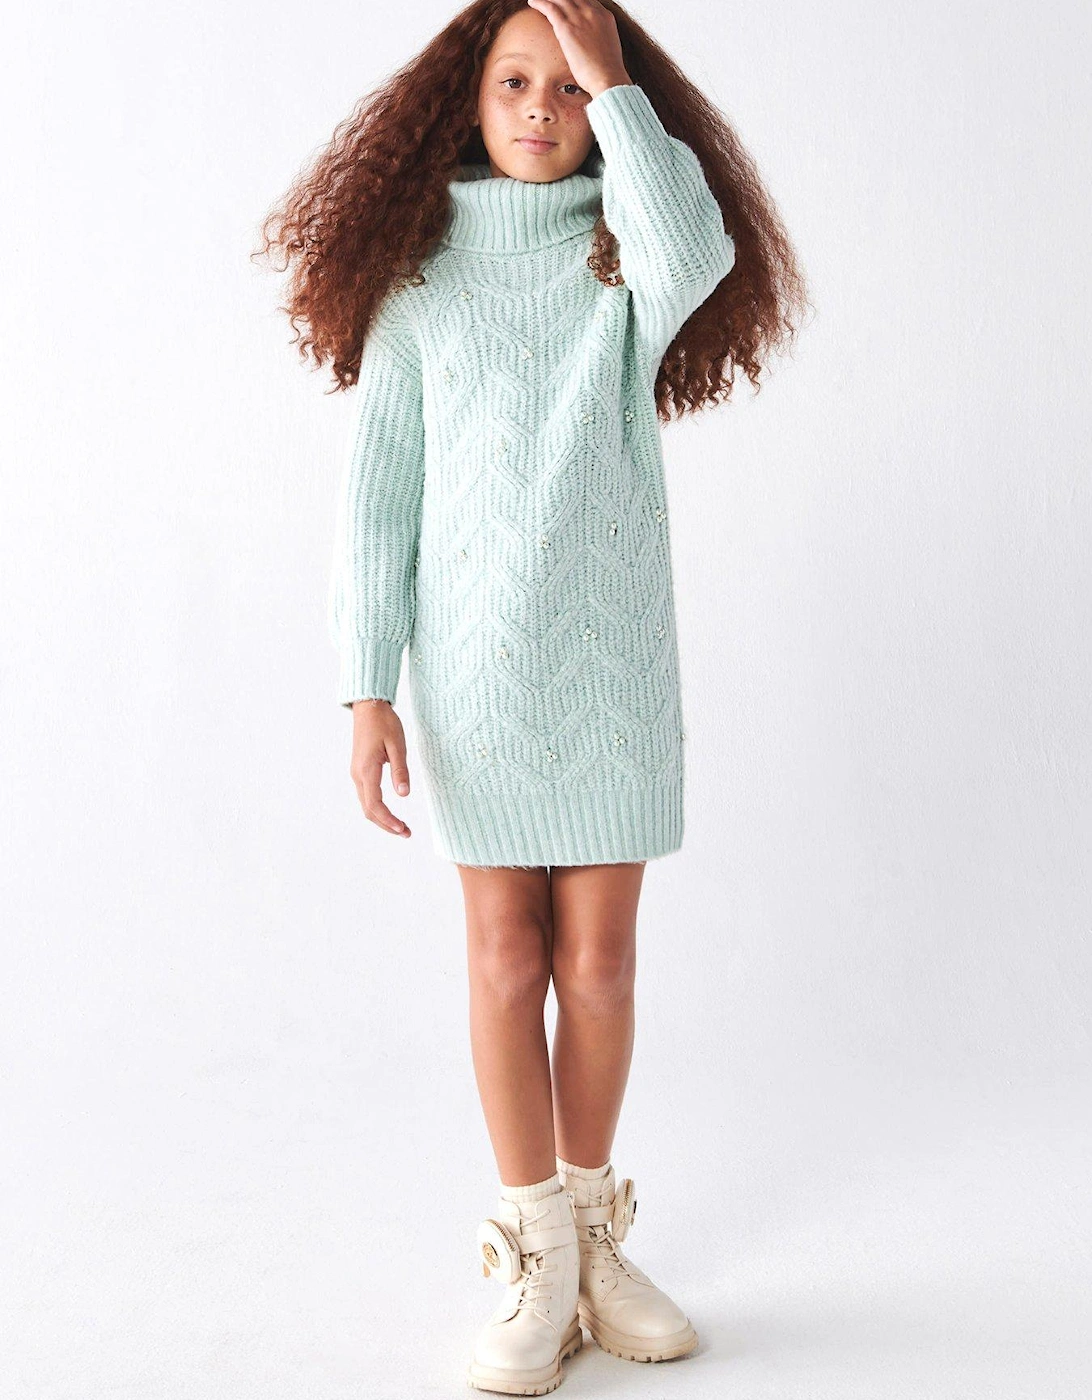 Girls Embellished Cable Knit Dress - Green